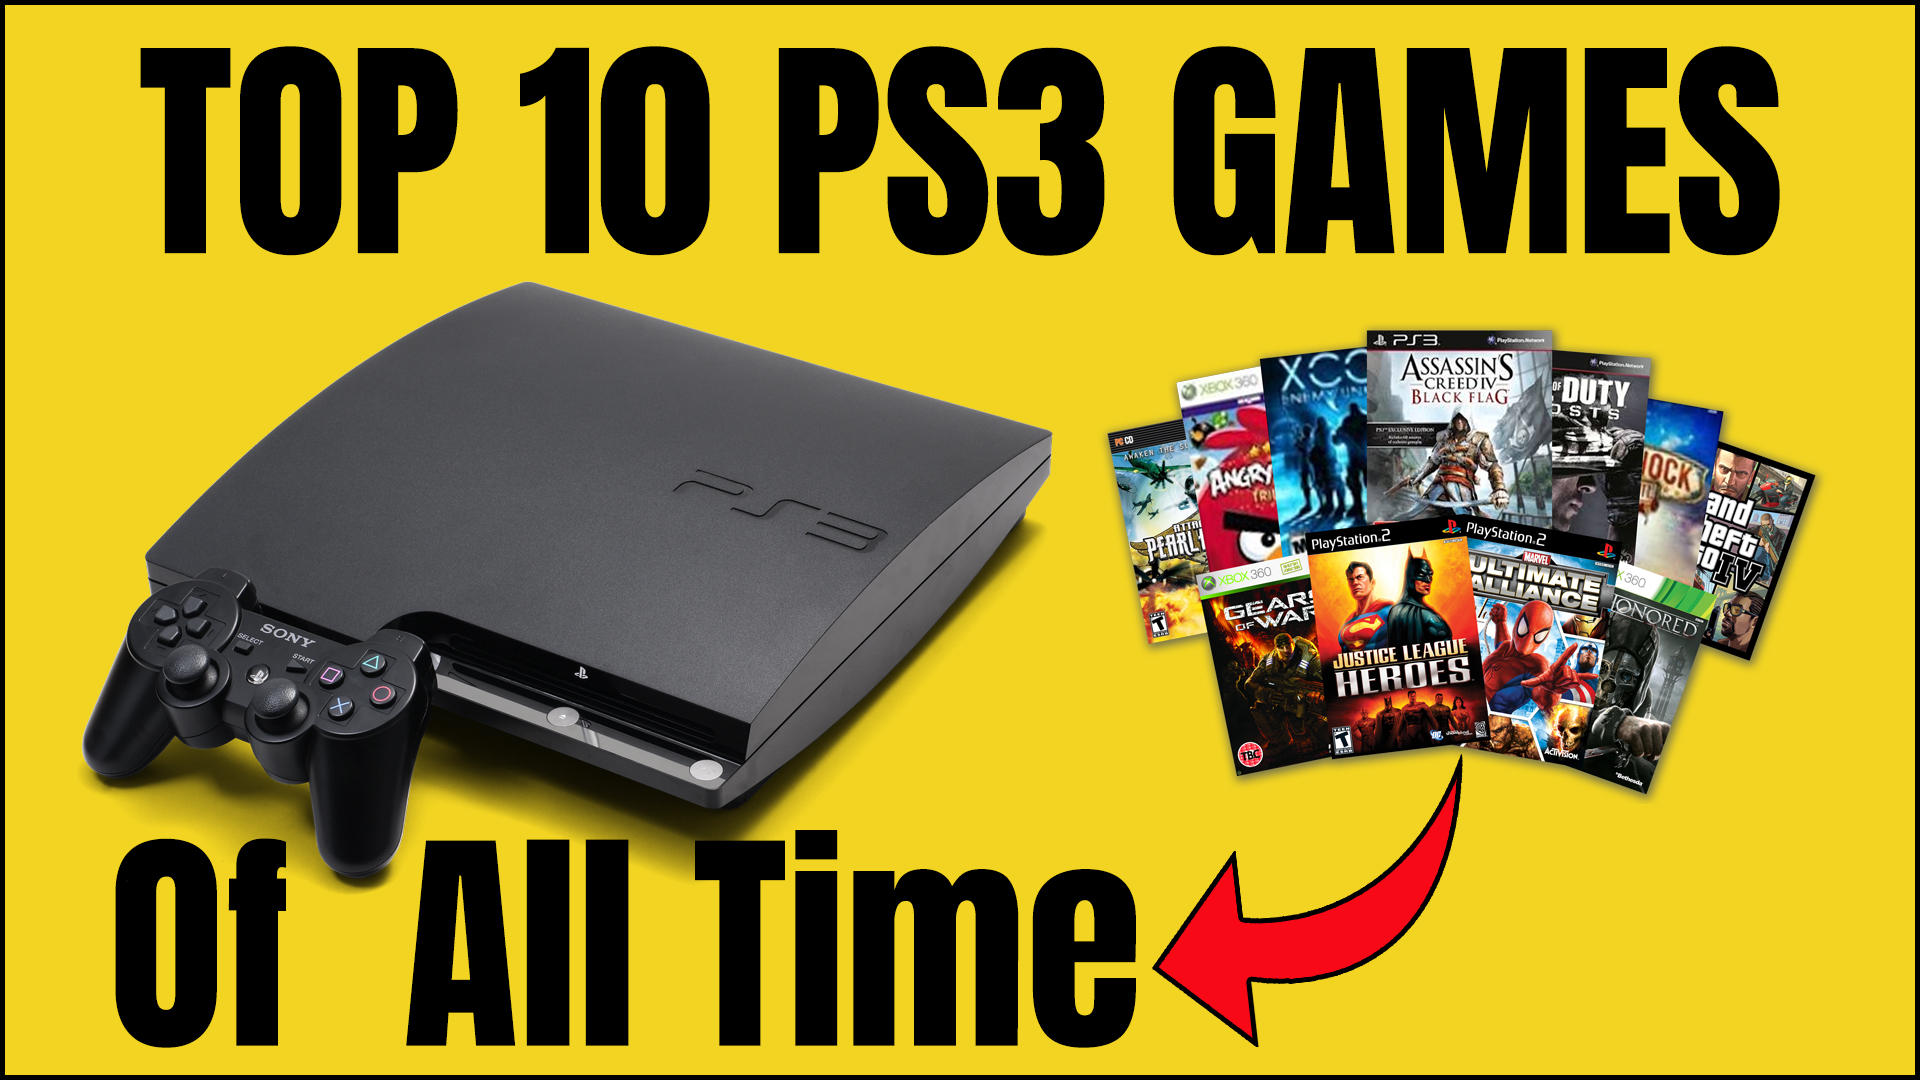 Top 10 PS3 Games of All Time